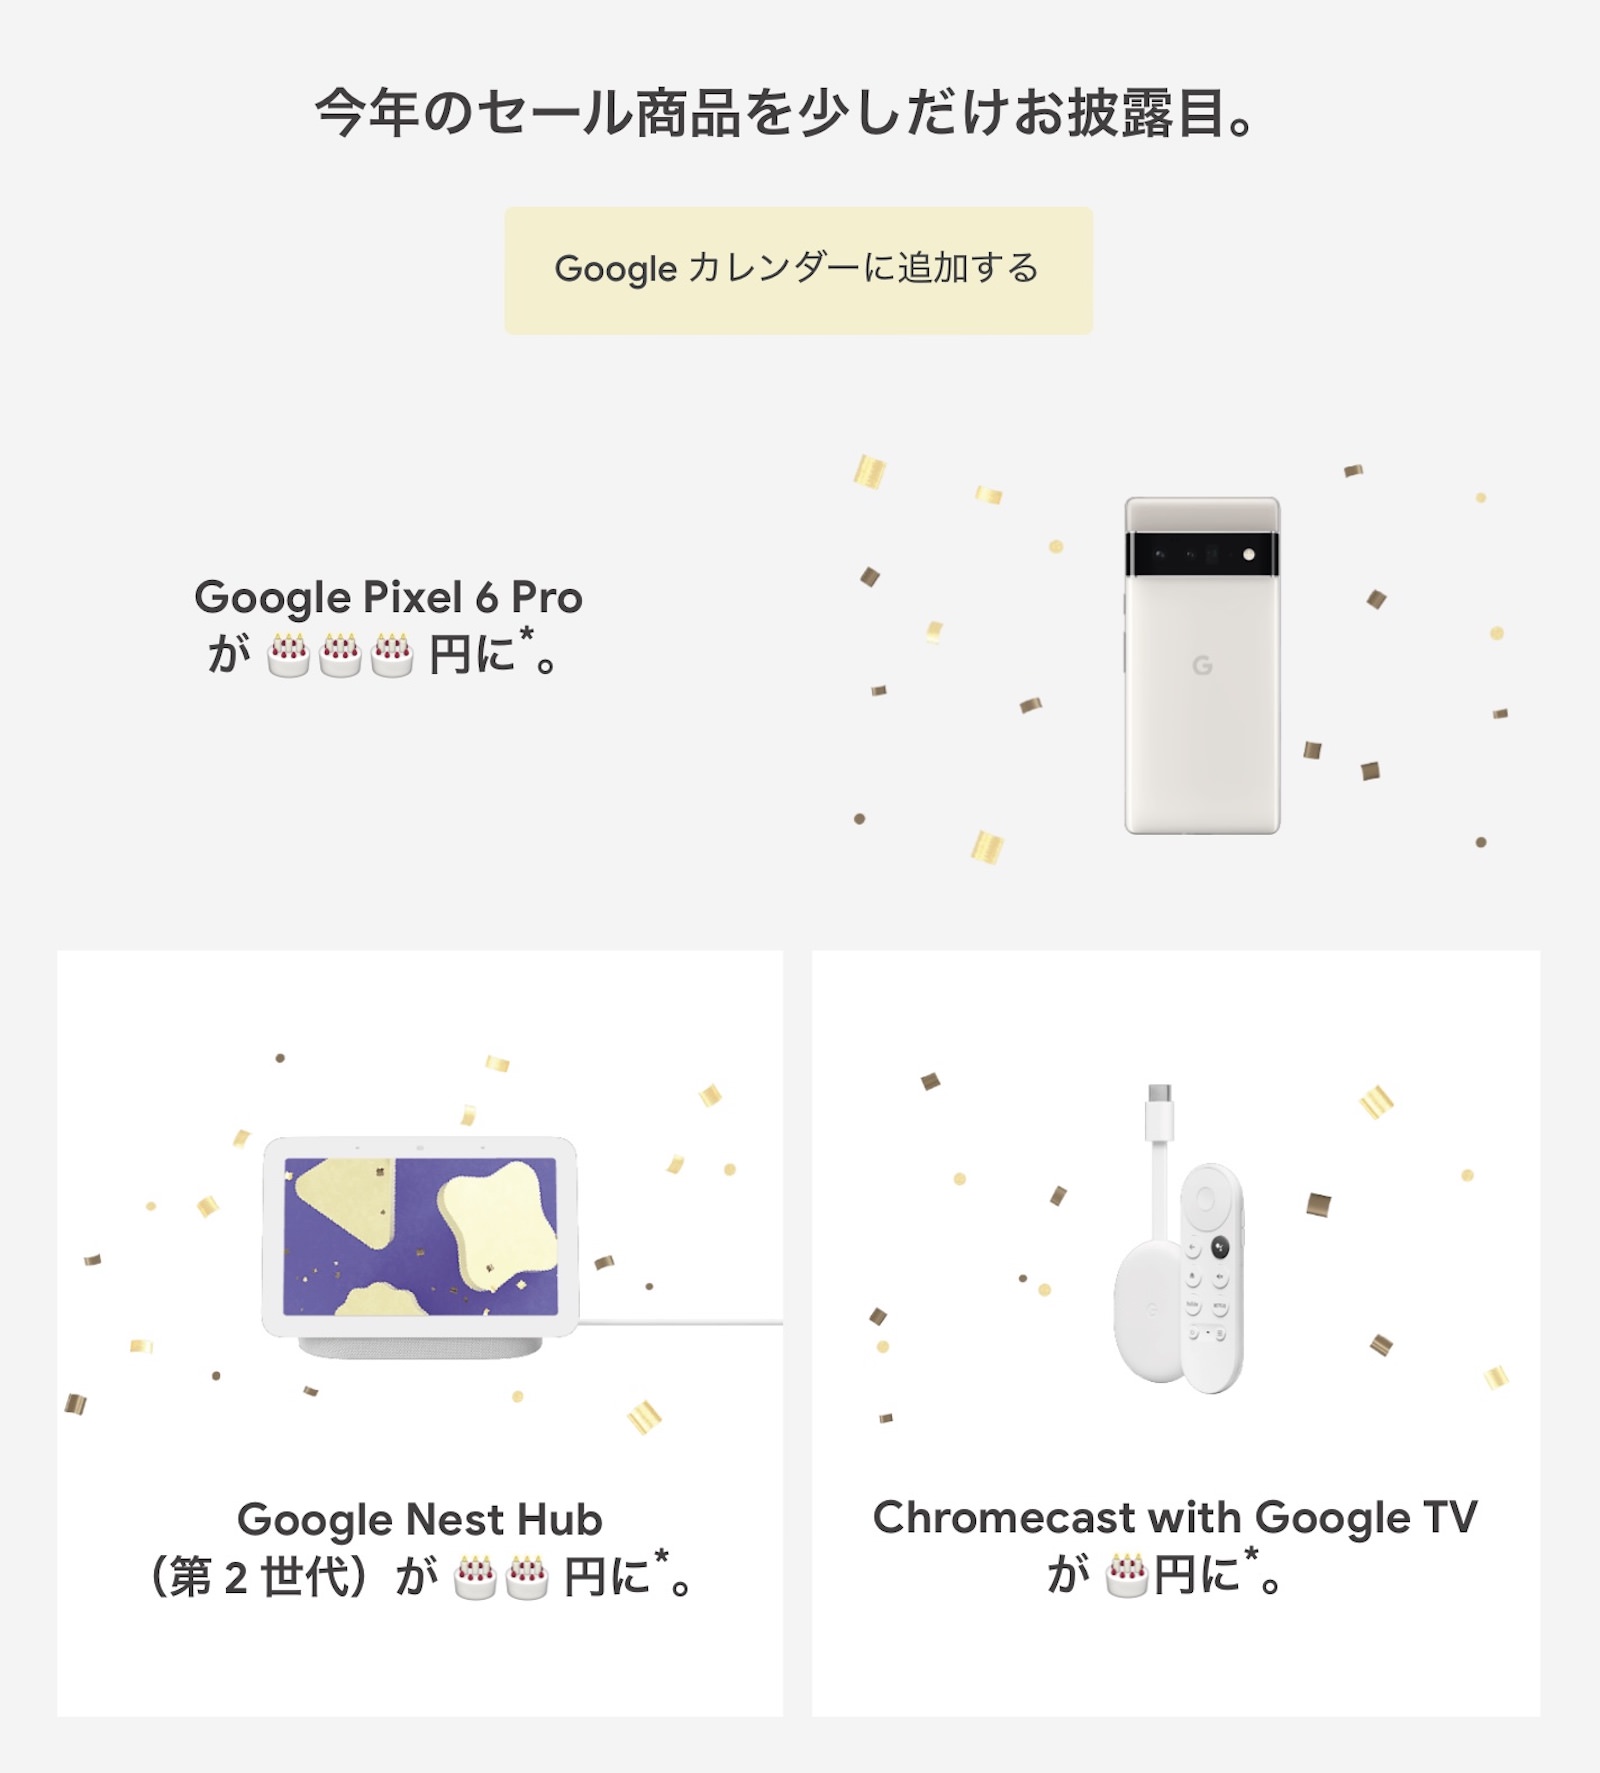 Google Store sale on sep 9th 2